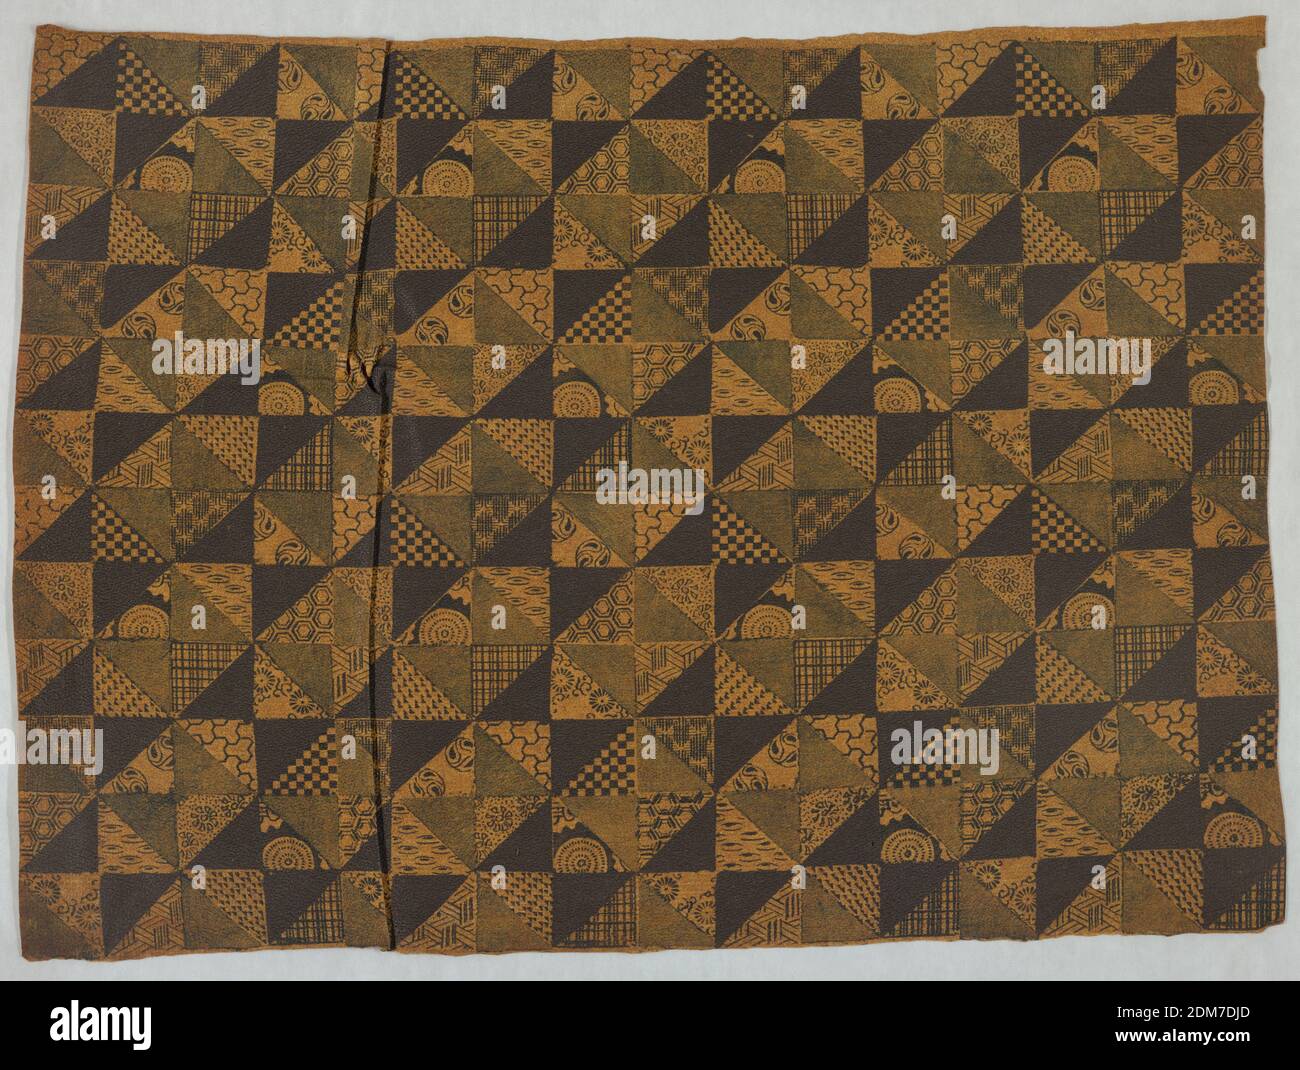 Imitation leather, Fiber composition impregnated with tung oil, embossed and painted, Repeating design made up of adjoining small triangles, some filled in with solid color, the others ornamented with small geometrical figures and flower designs. Dark brown and gray on yellowish ground., Japan, ca. 1885, Wallcoverings, Imitation leather Stock Photo